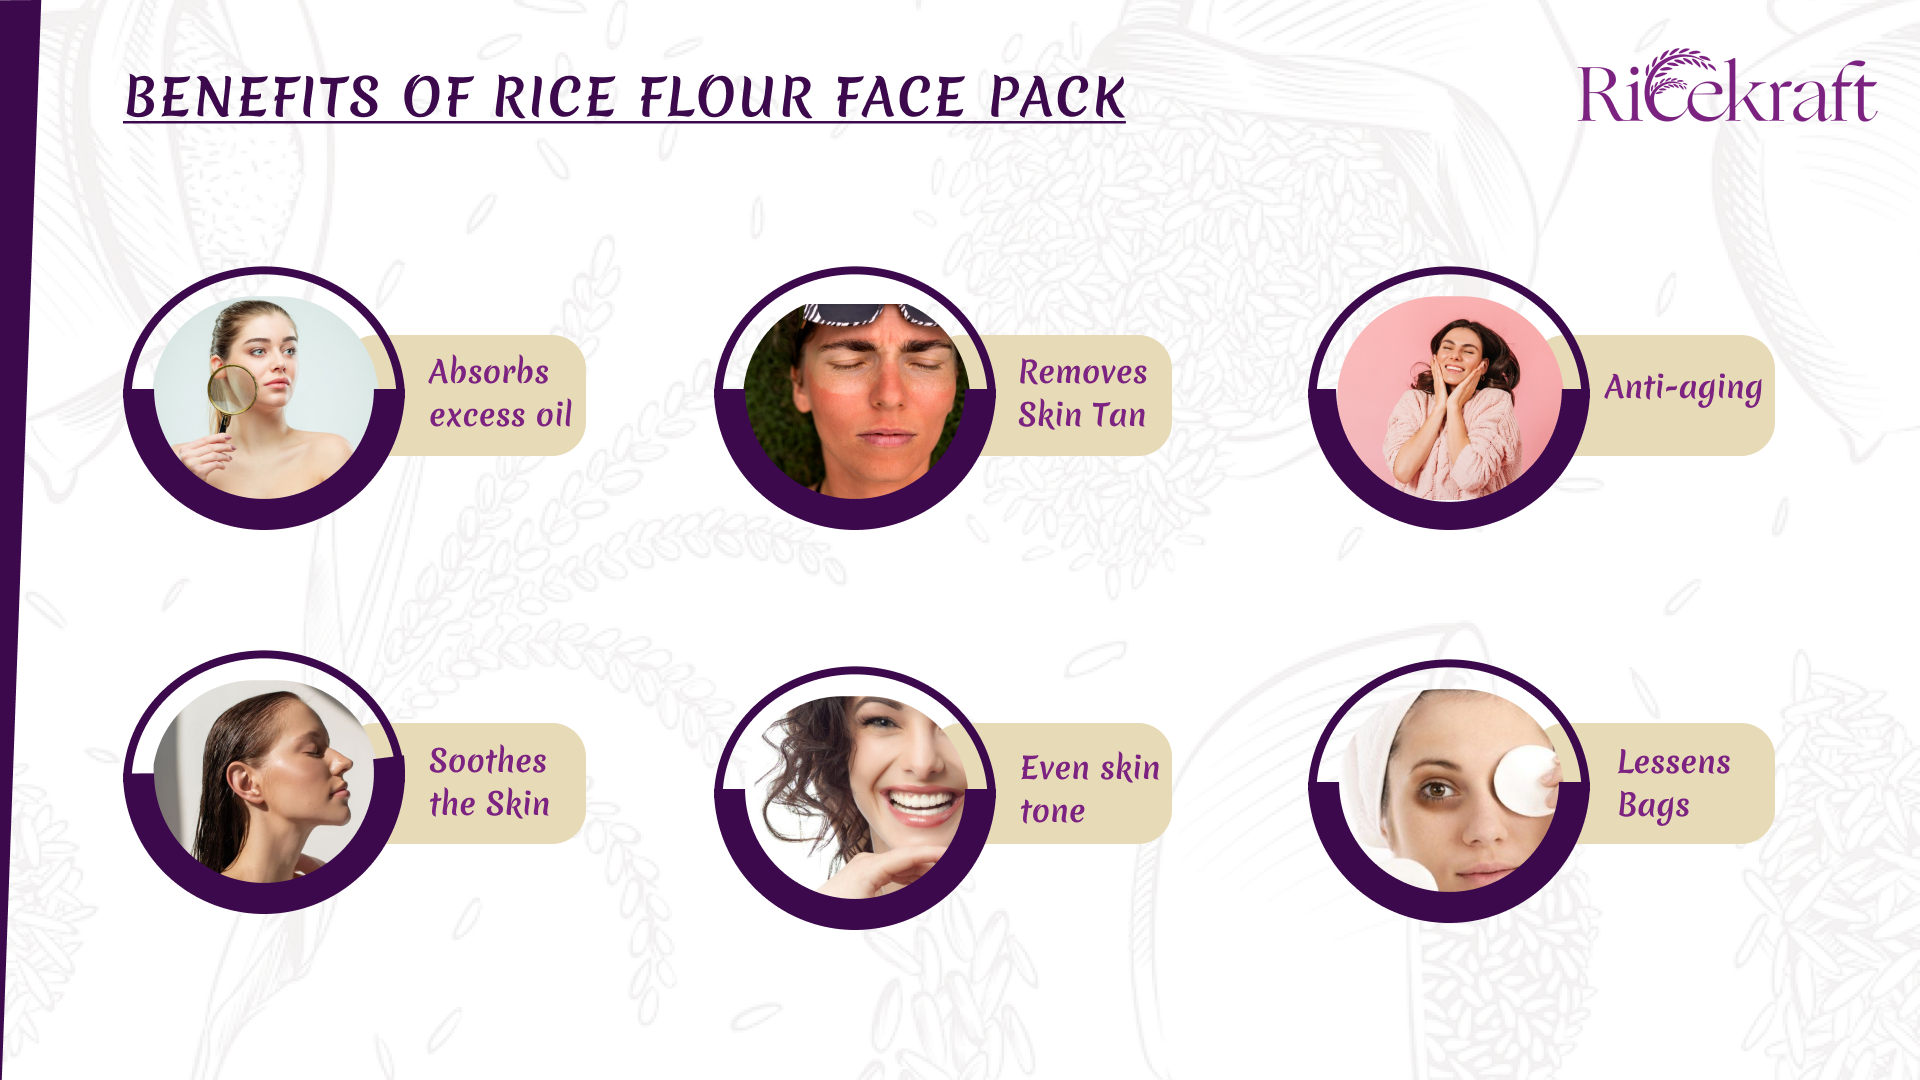 Benefits of Rice Flour Face Pack